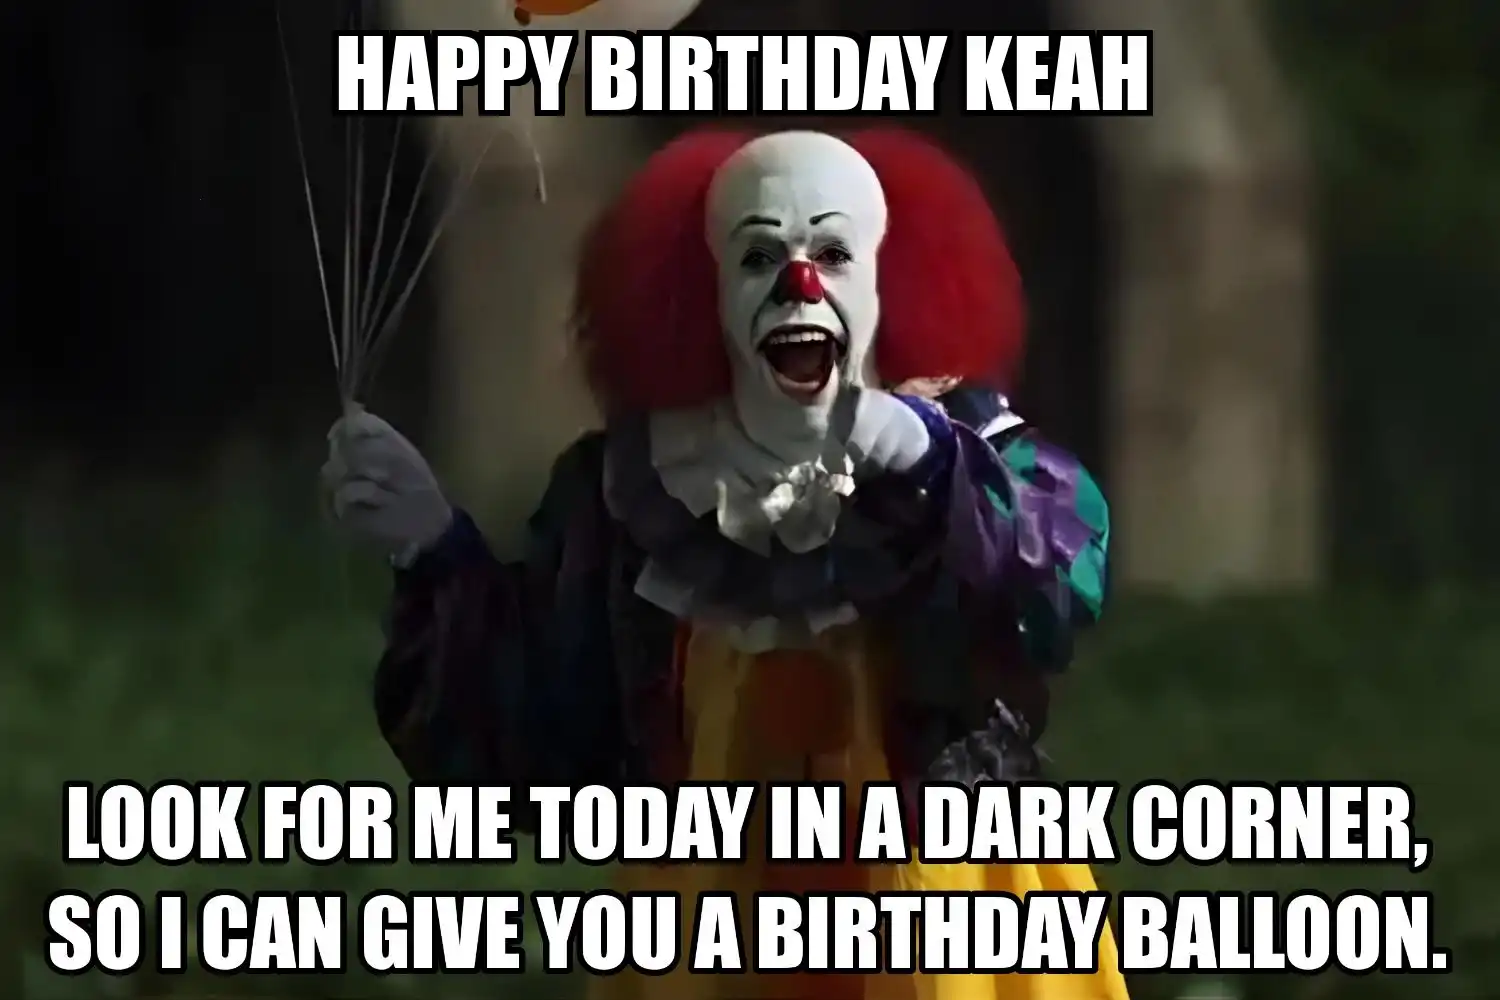 Happy Birthday Keah I Can Give You A Balloon Meme